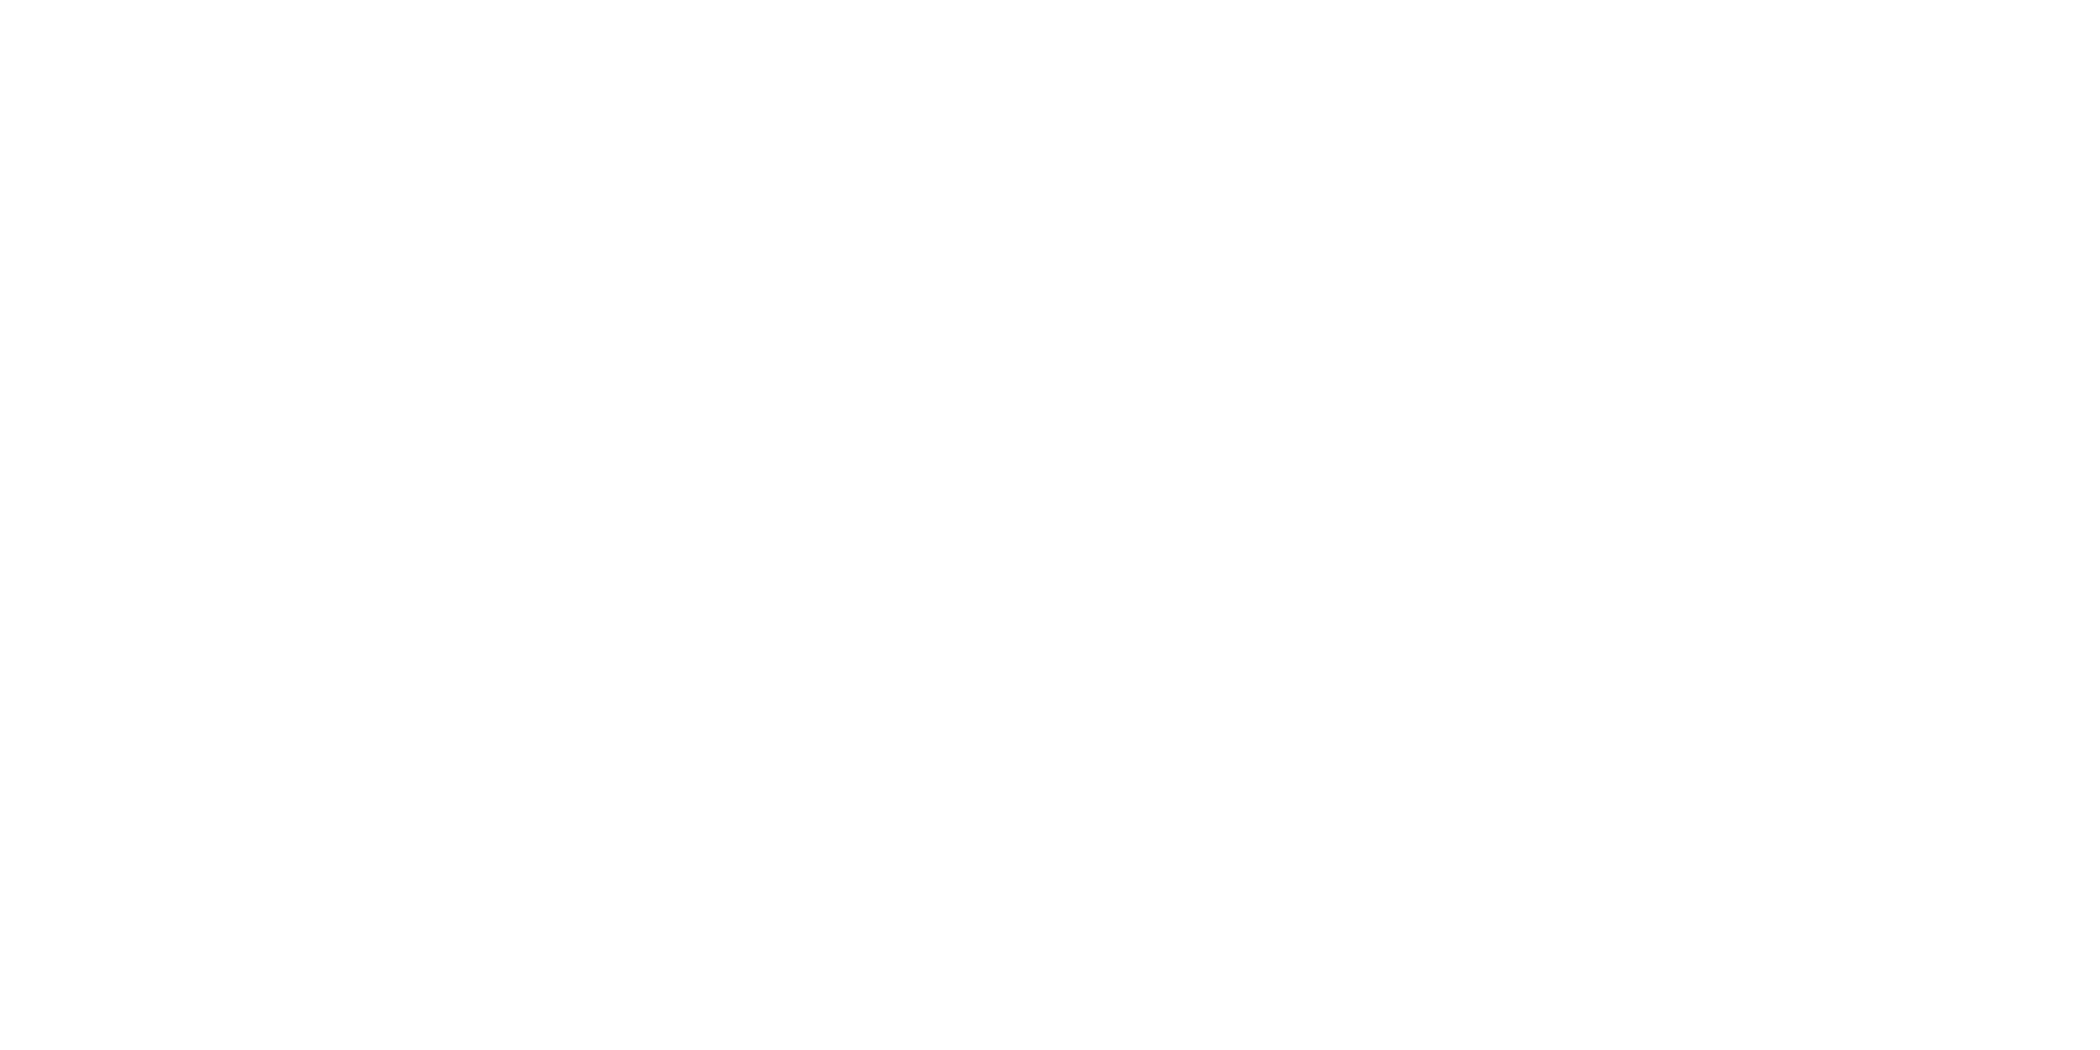 J & S Industrial Services Logo